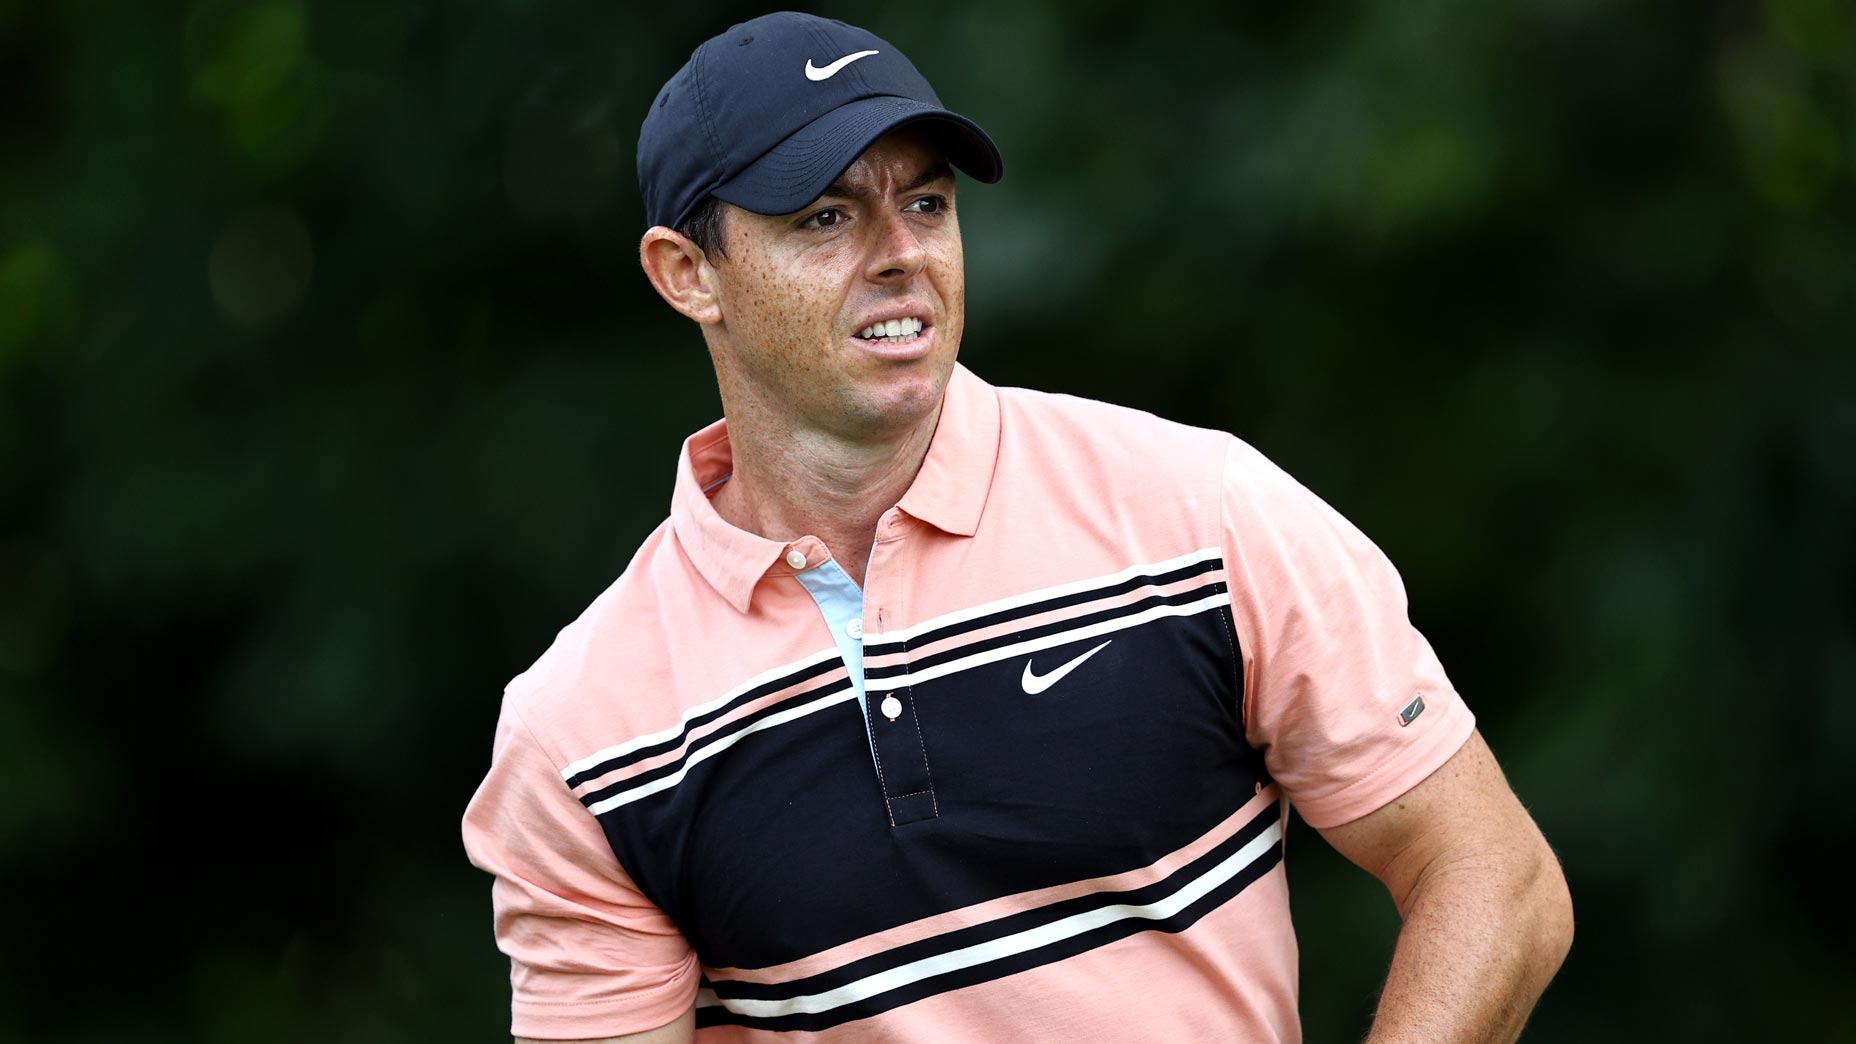 Shut down the PGA Tour? 'Silly,' says Rory McIlroy